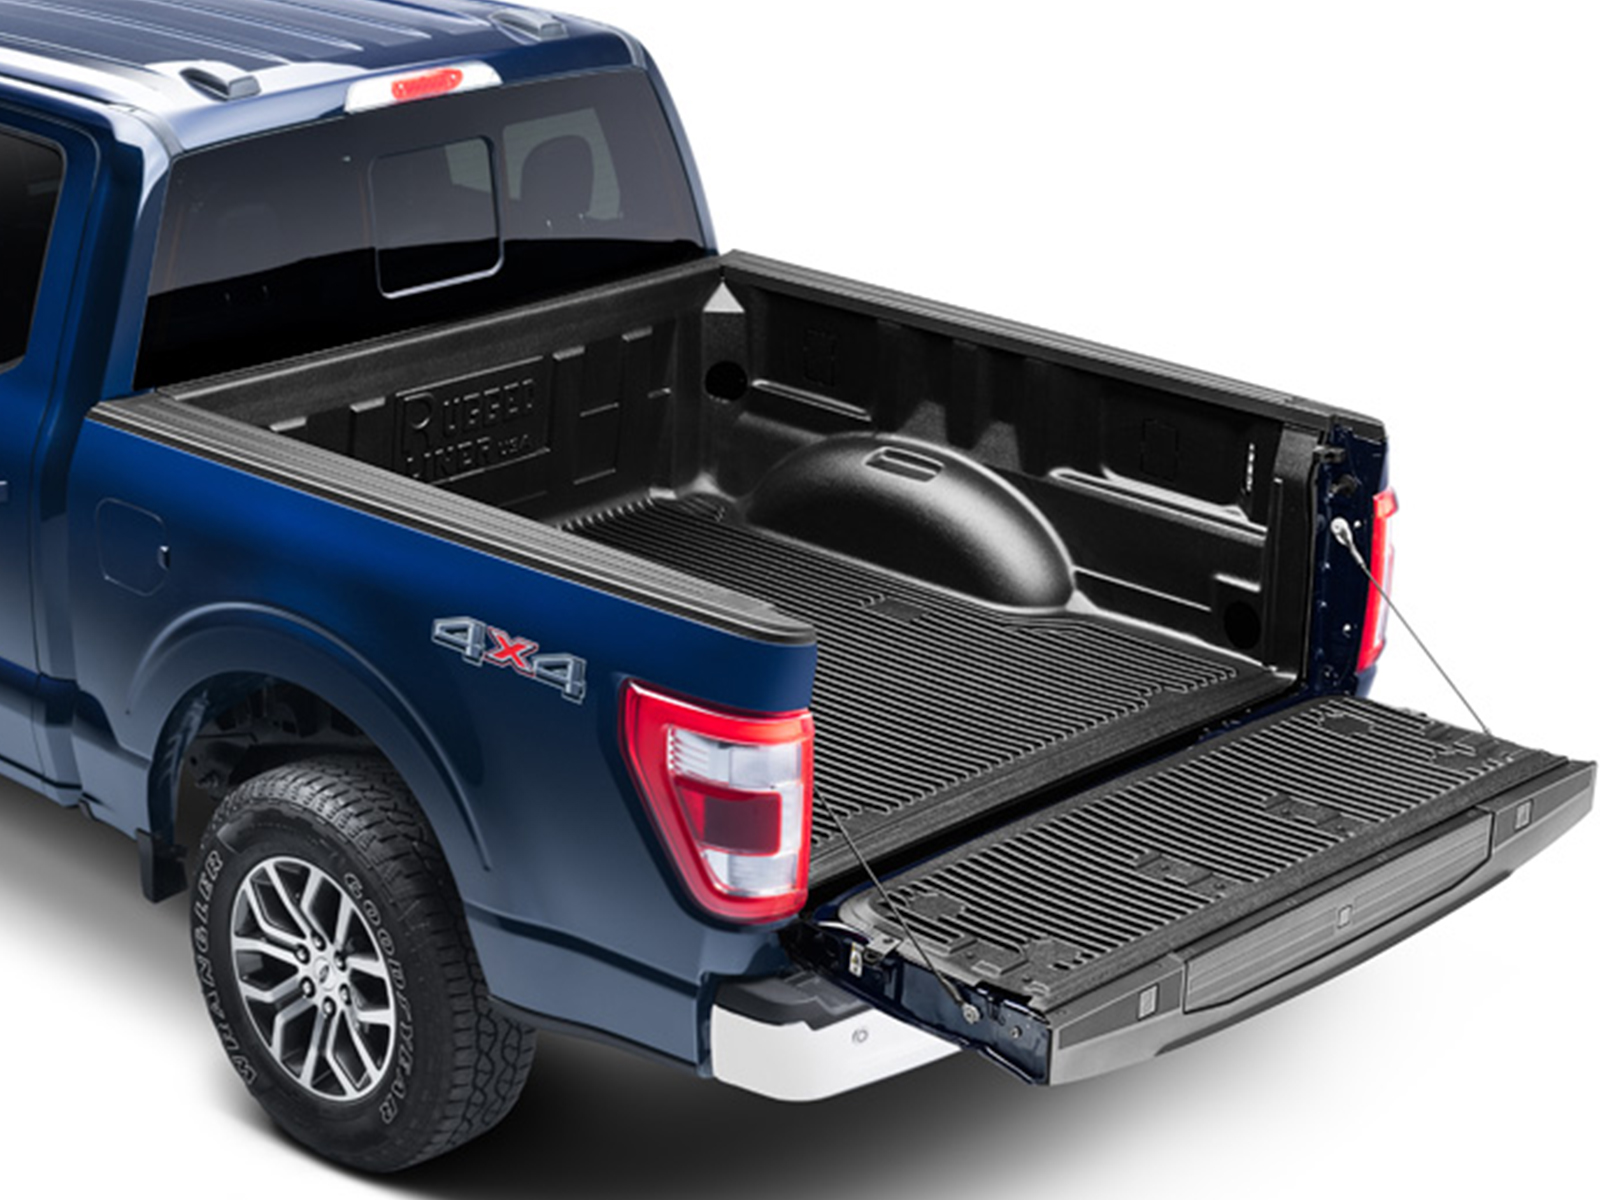 1994 Ford Ranger Bed Liners | RealTruck